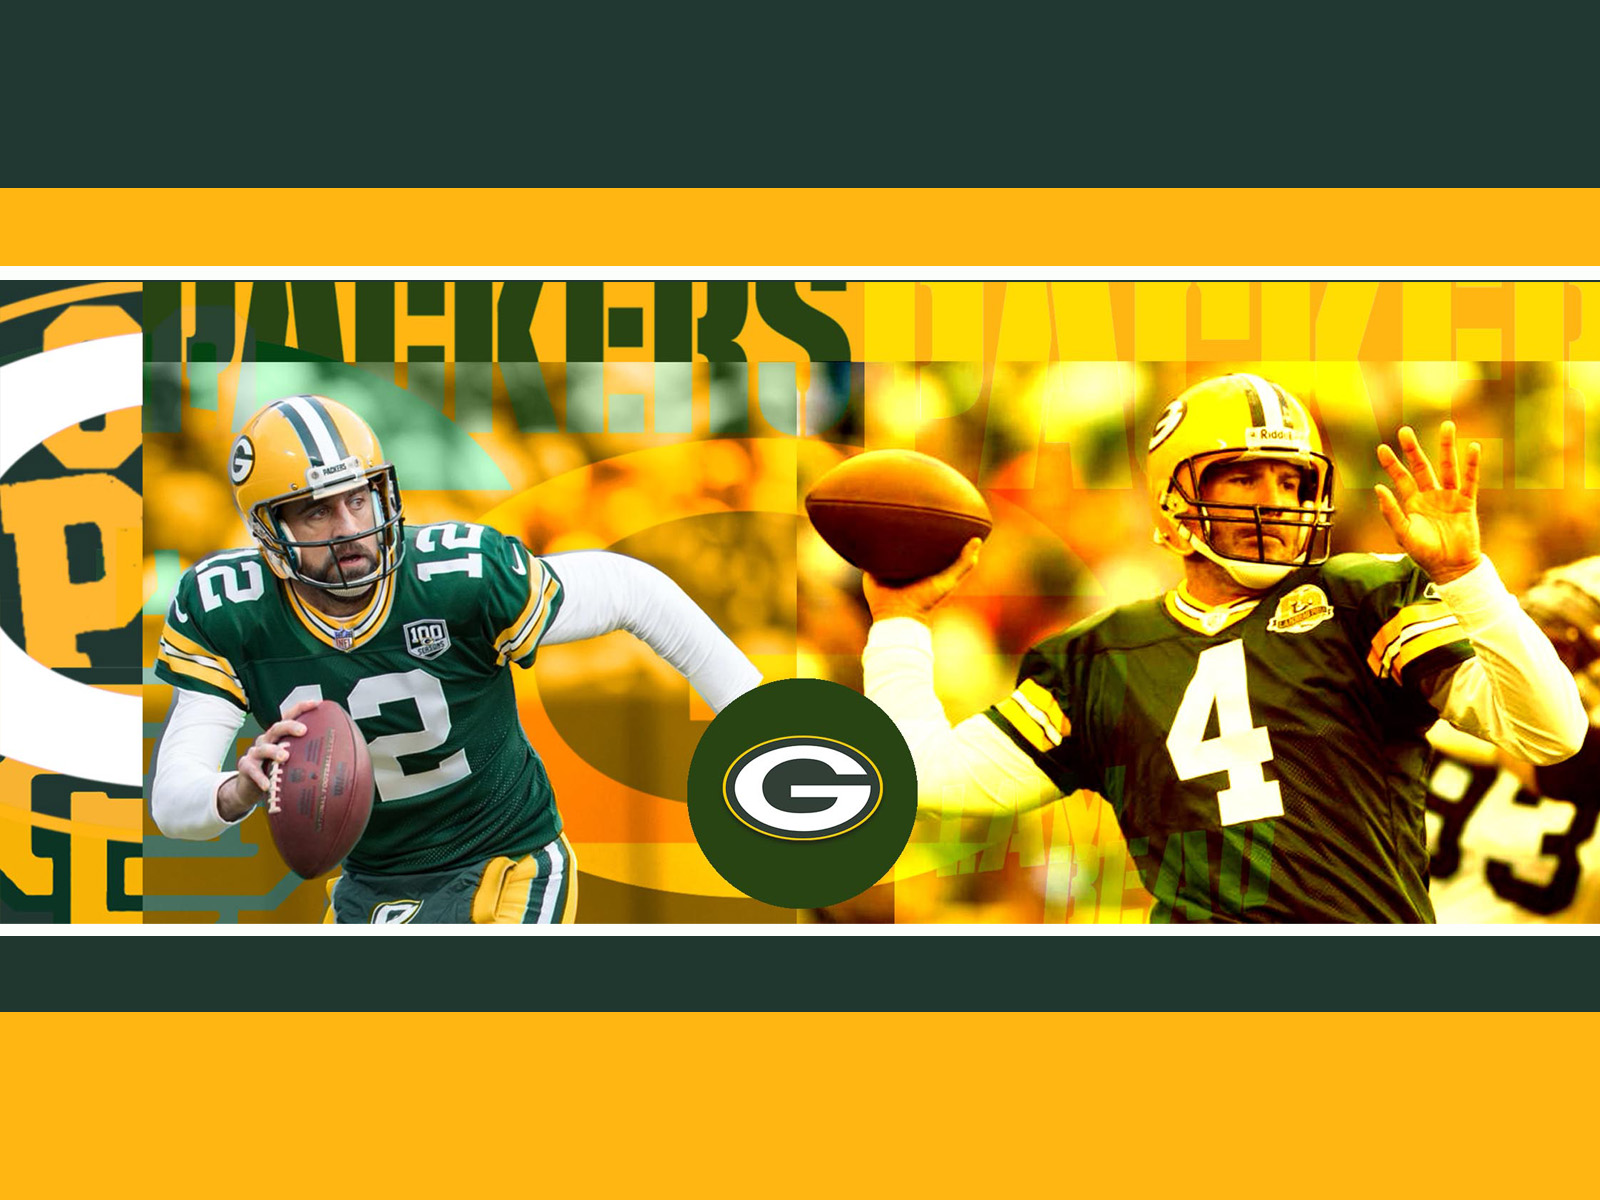 green bay packers apps